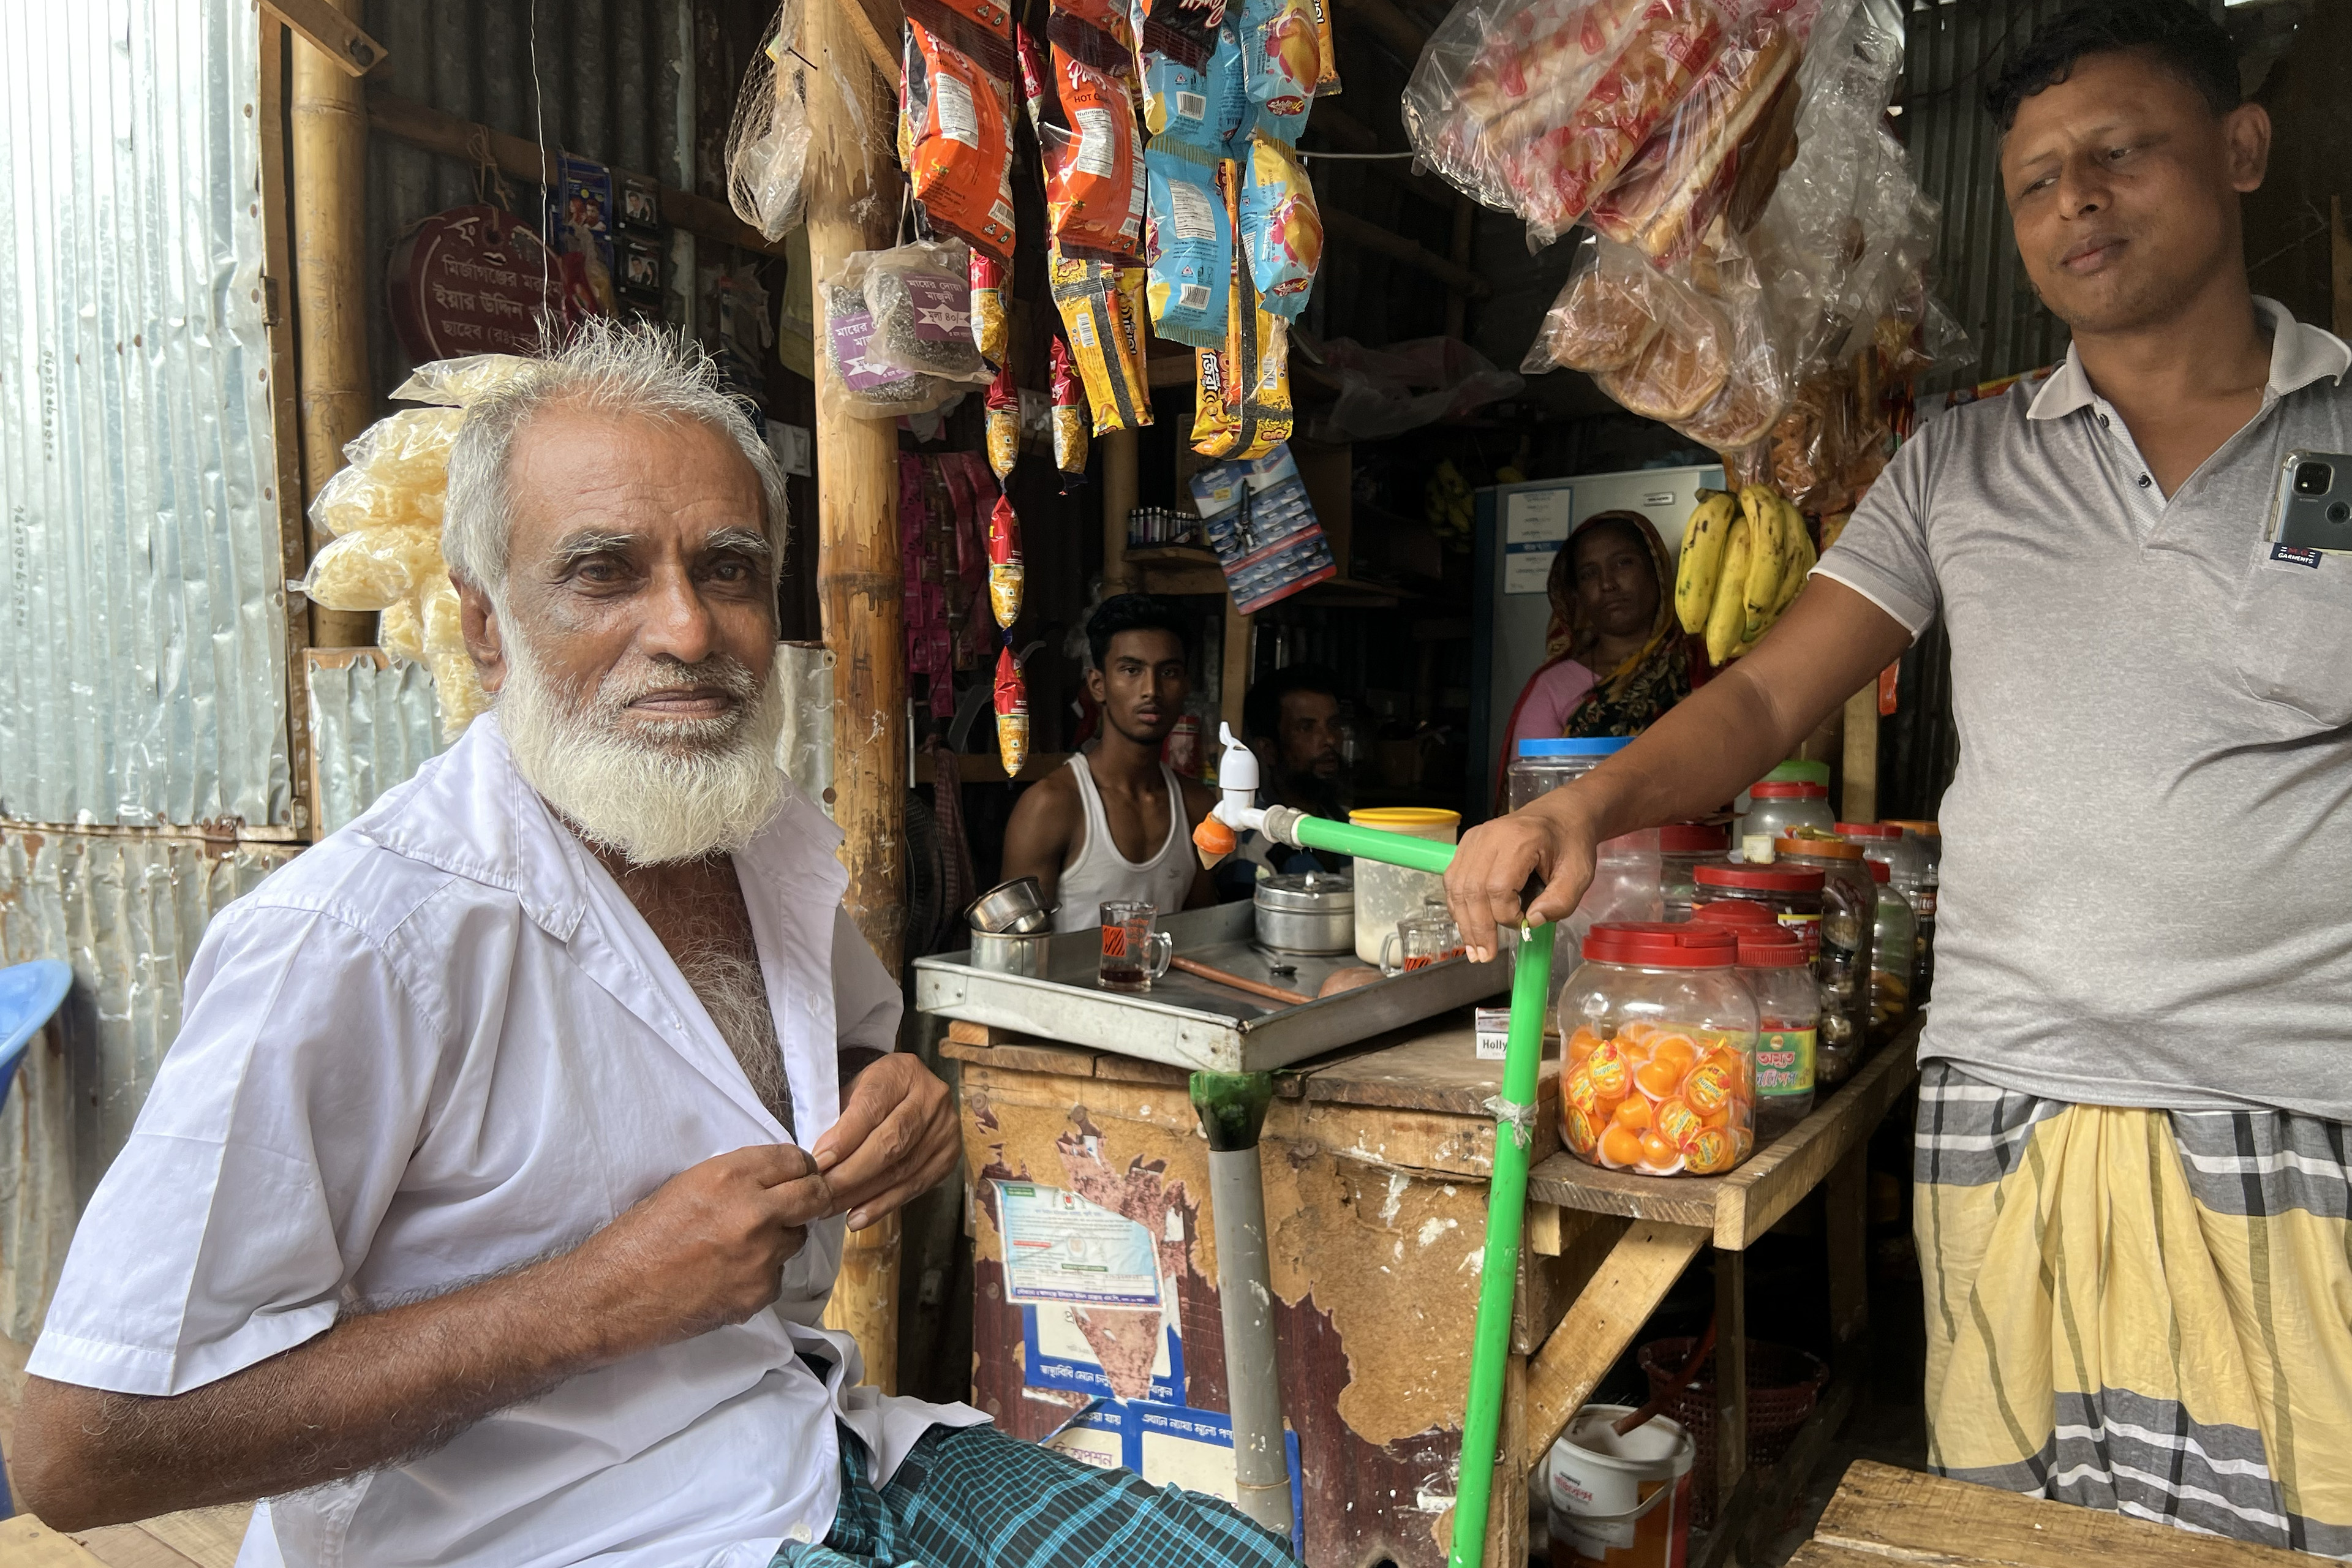 Shohrab, a man in his early 70s, sits outside a tea stall on a well-worn wooden bench near his home in Dhaka. Inside the stall, a colorful display of snacks and sweets hang from the ceiling. Three other men and one woman are nearby in the tea stall.